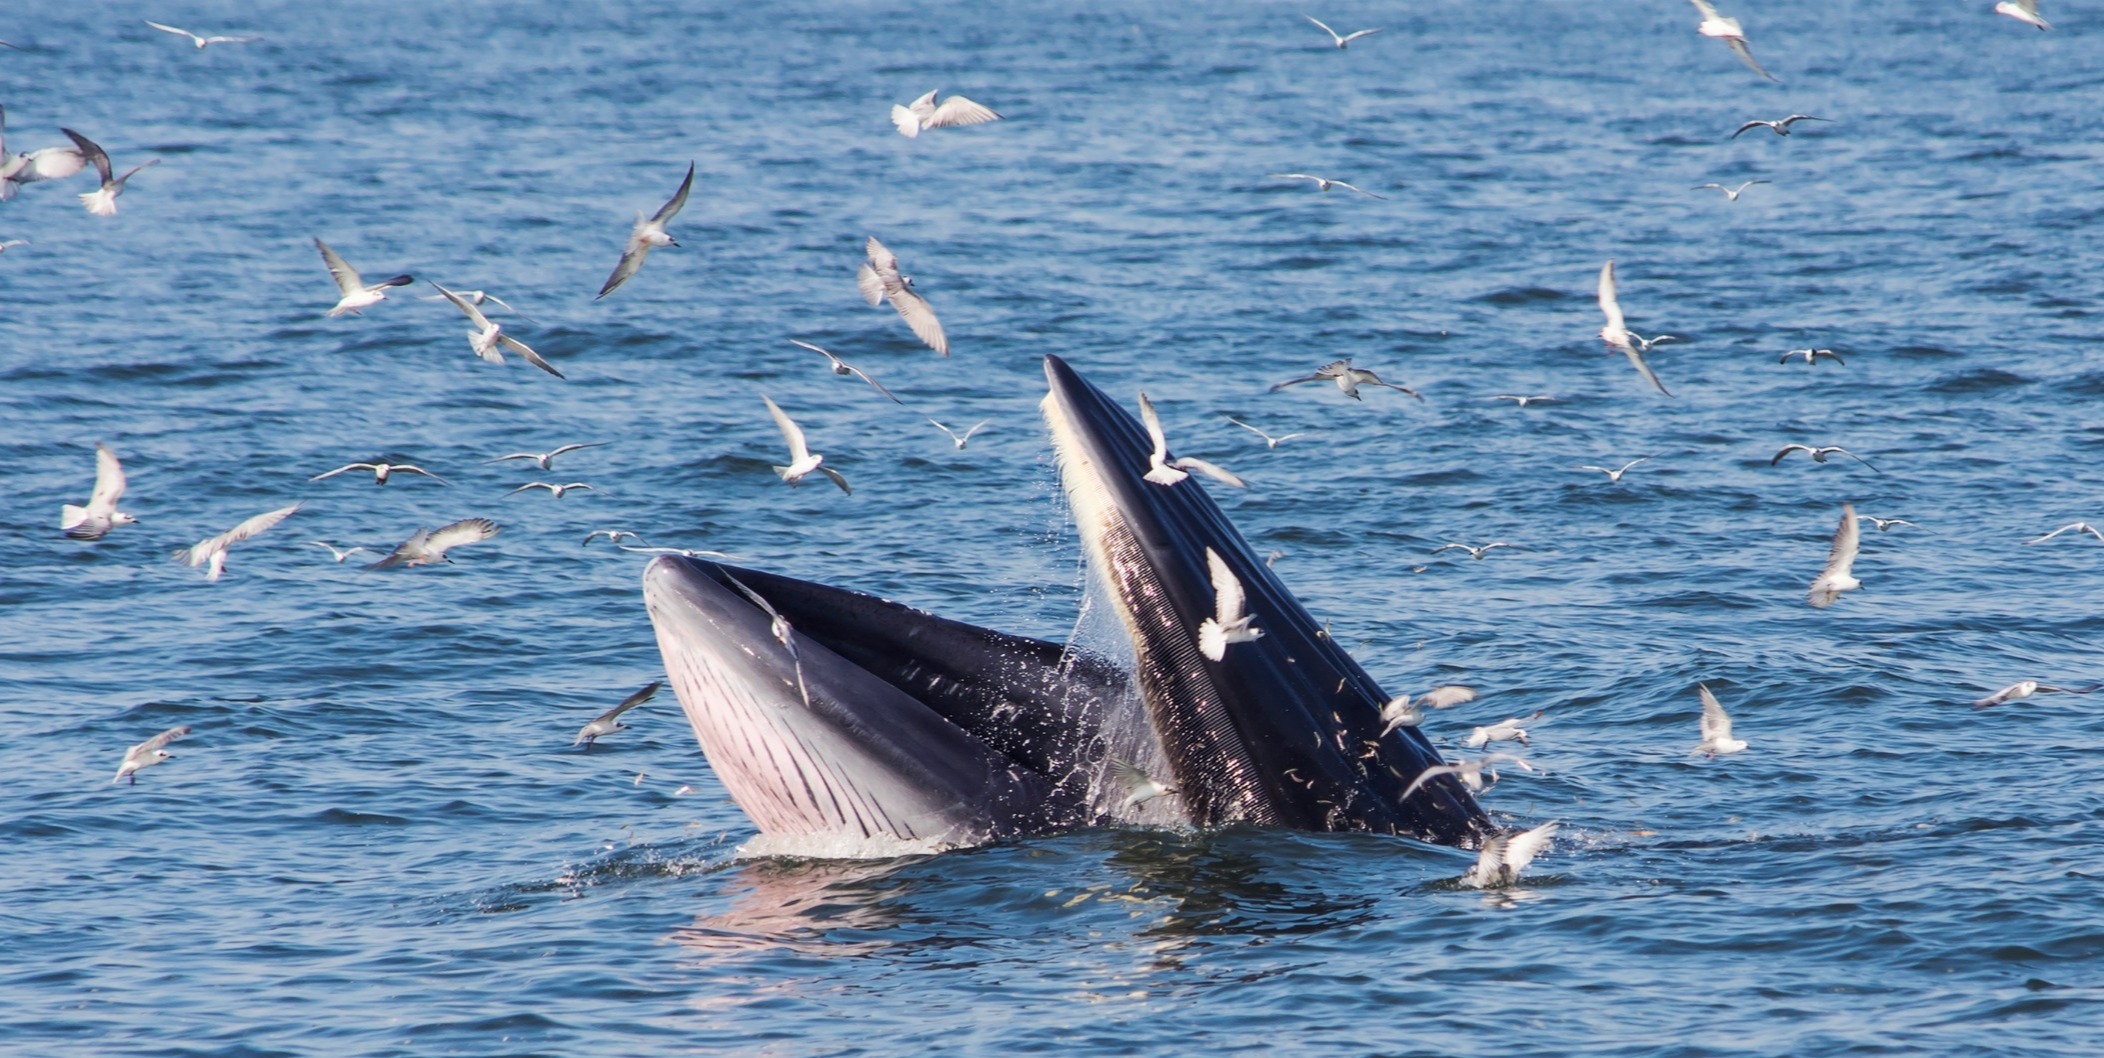 Bryde's whale feeding with seagulls eat small fish from the mouth in Thai gulf